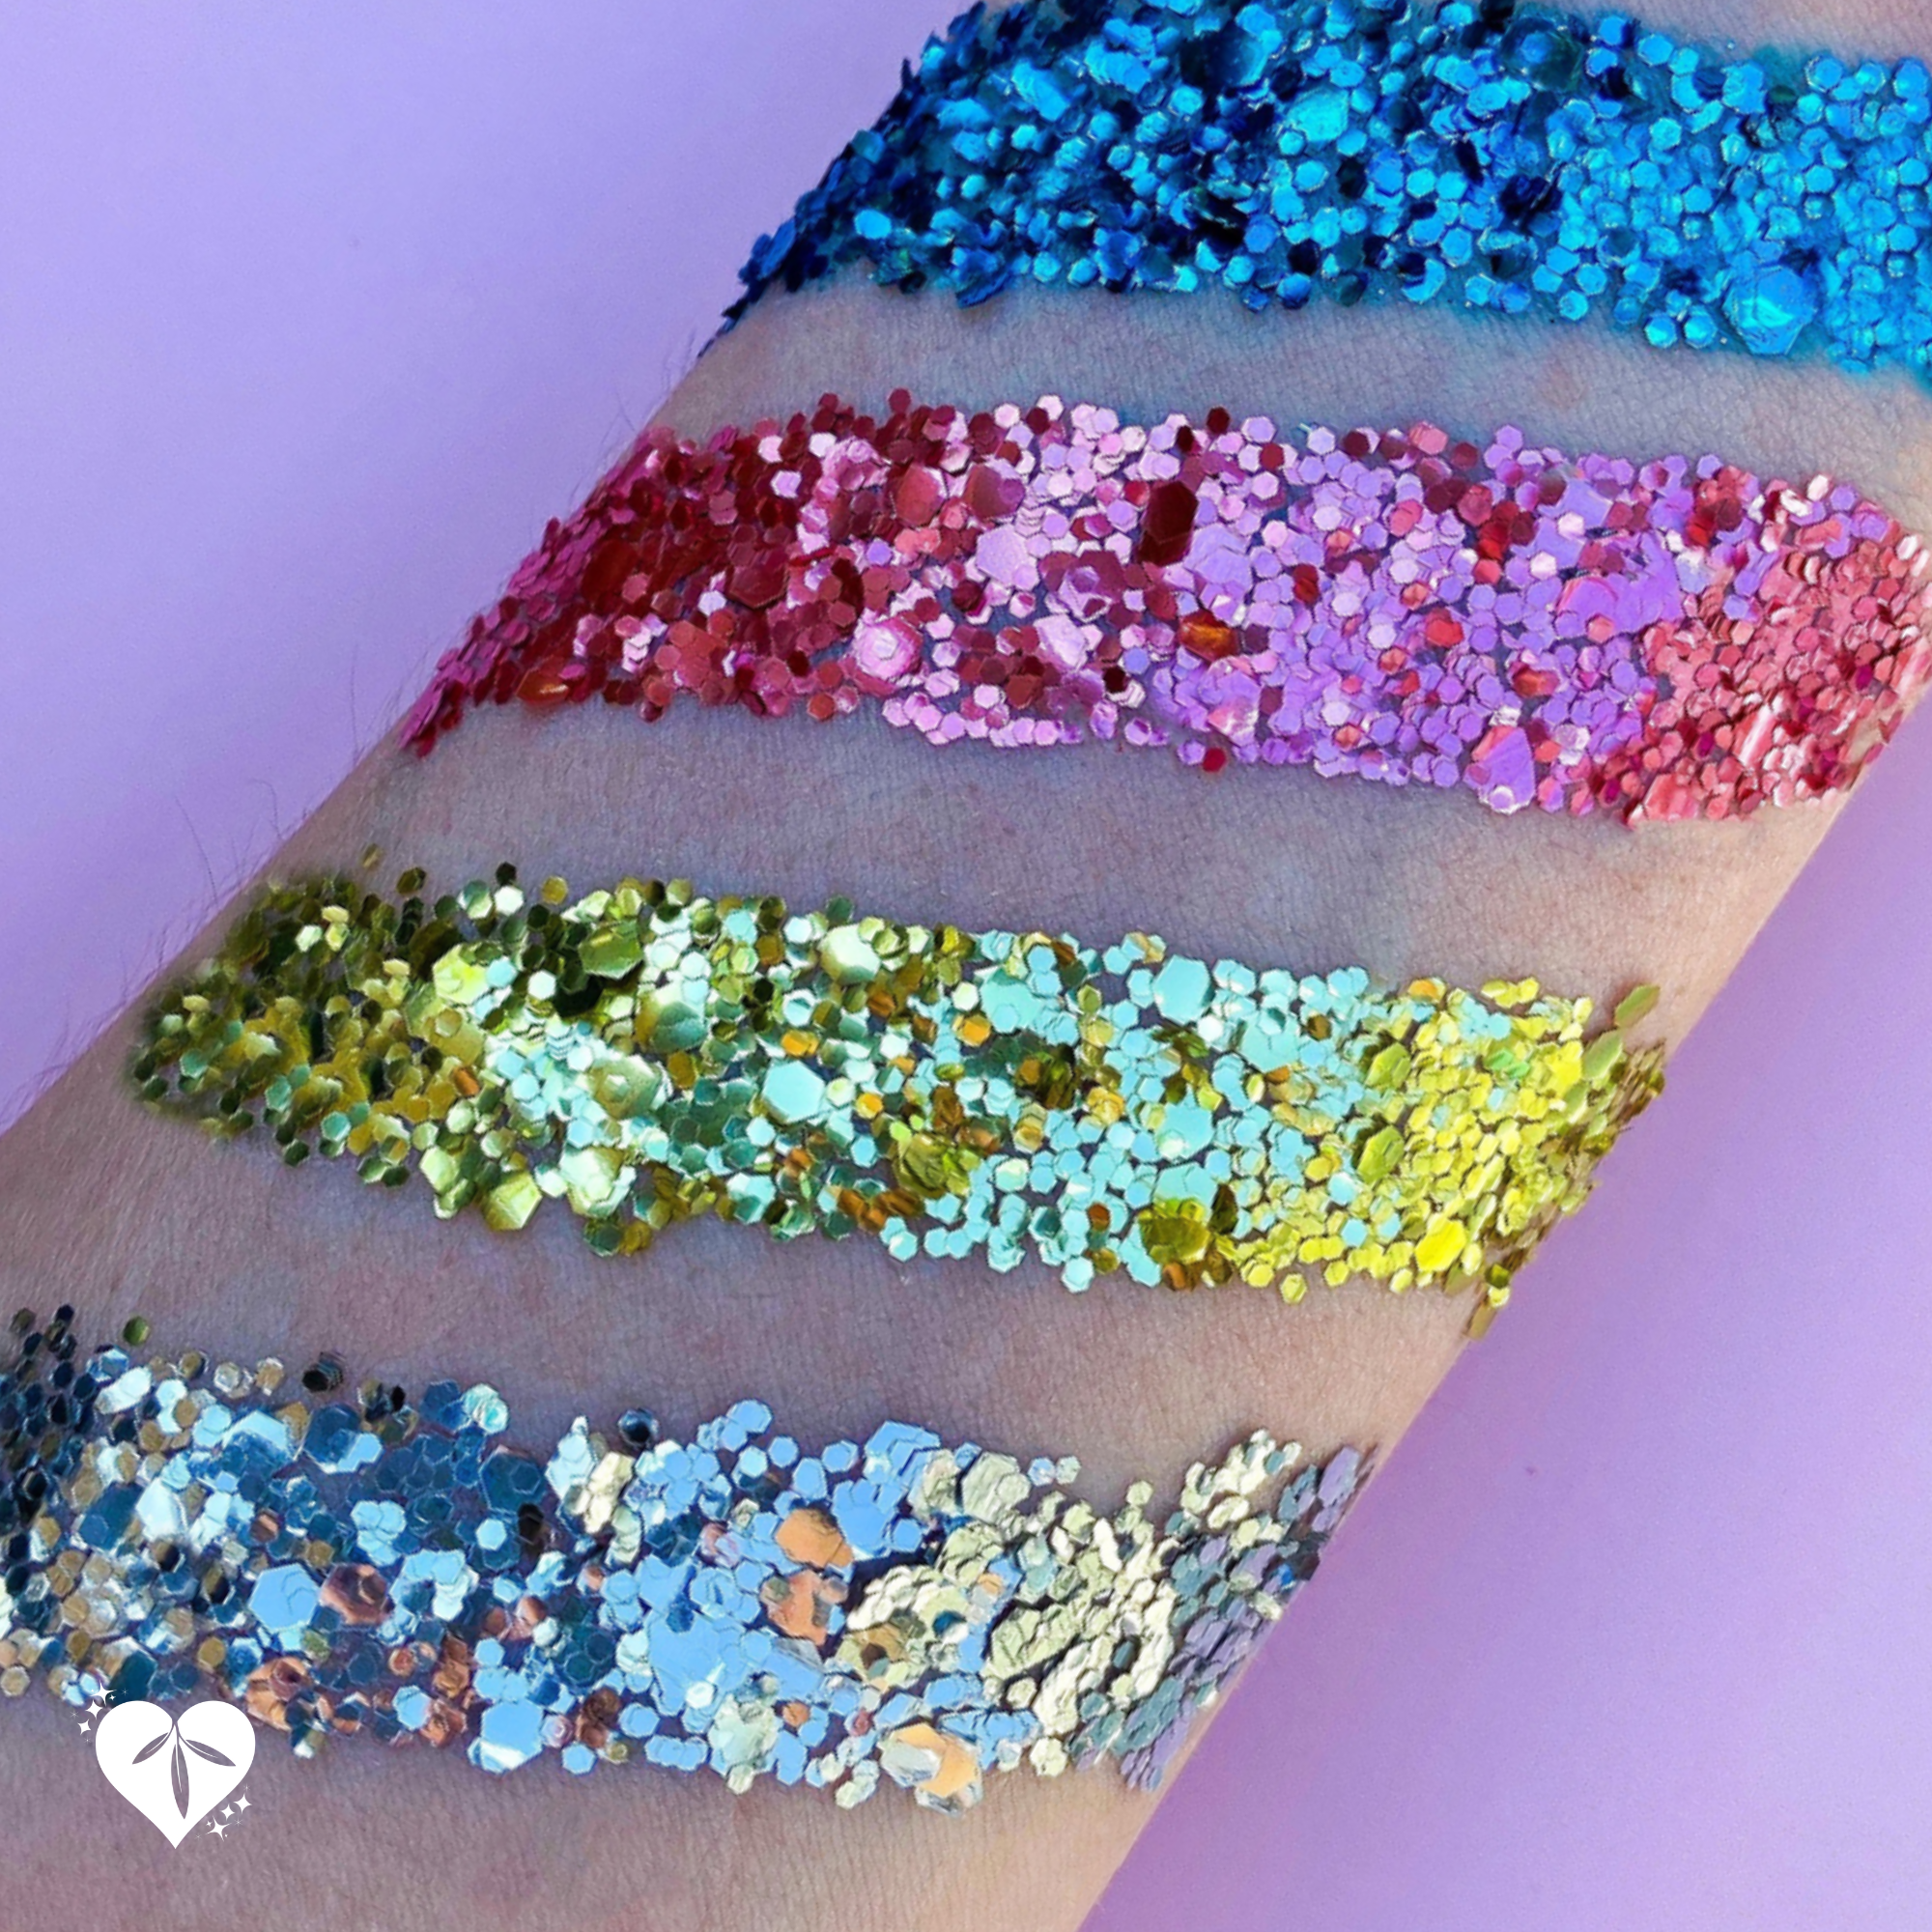 Starter set of biodegradable glitter in gold, silver, pink and blue.